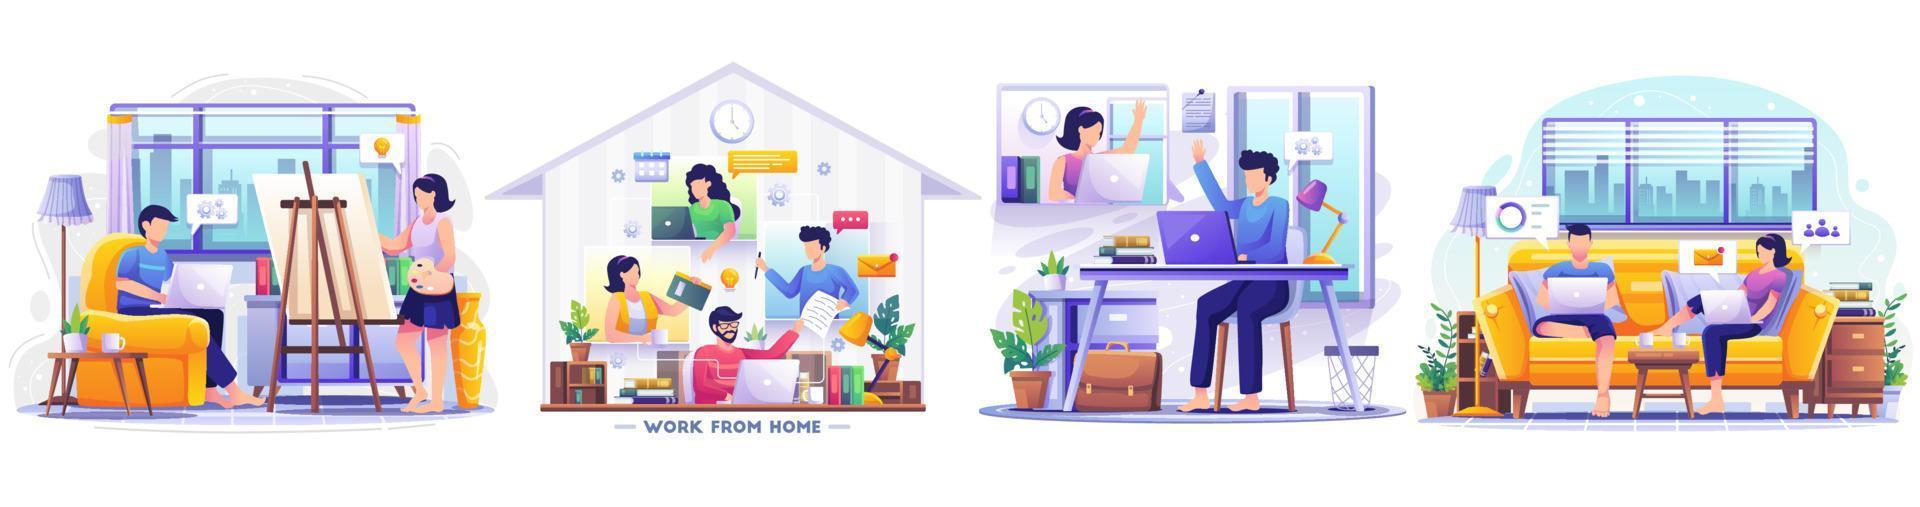 Set of Work From Home concept. people remote working on laptop scene. self quarantine during pandemic. Flat style vector illustration